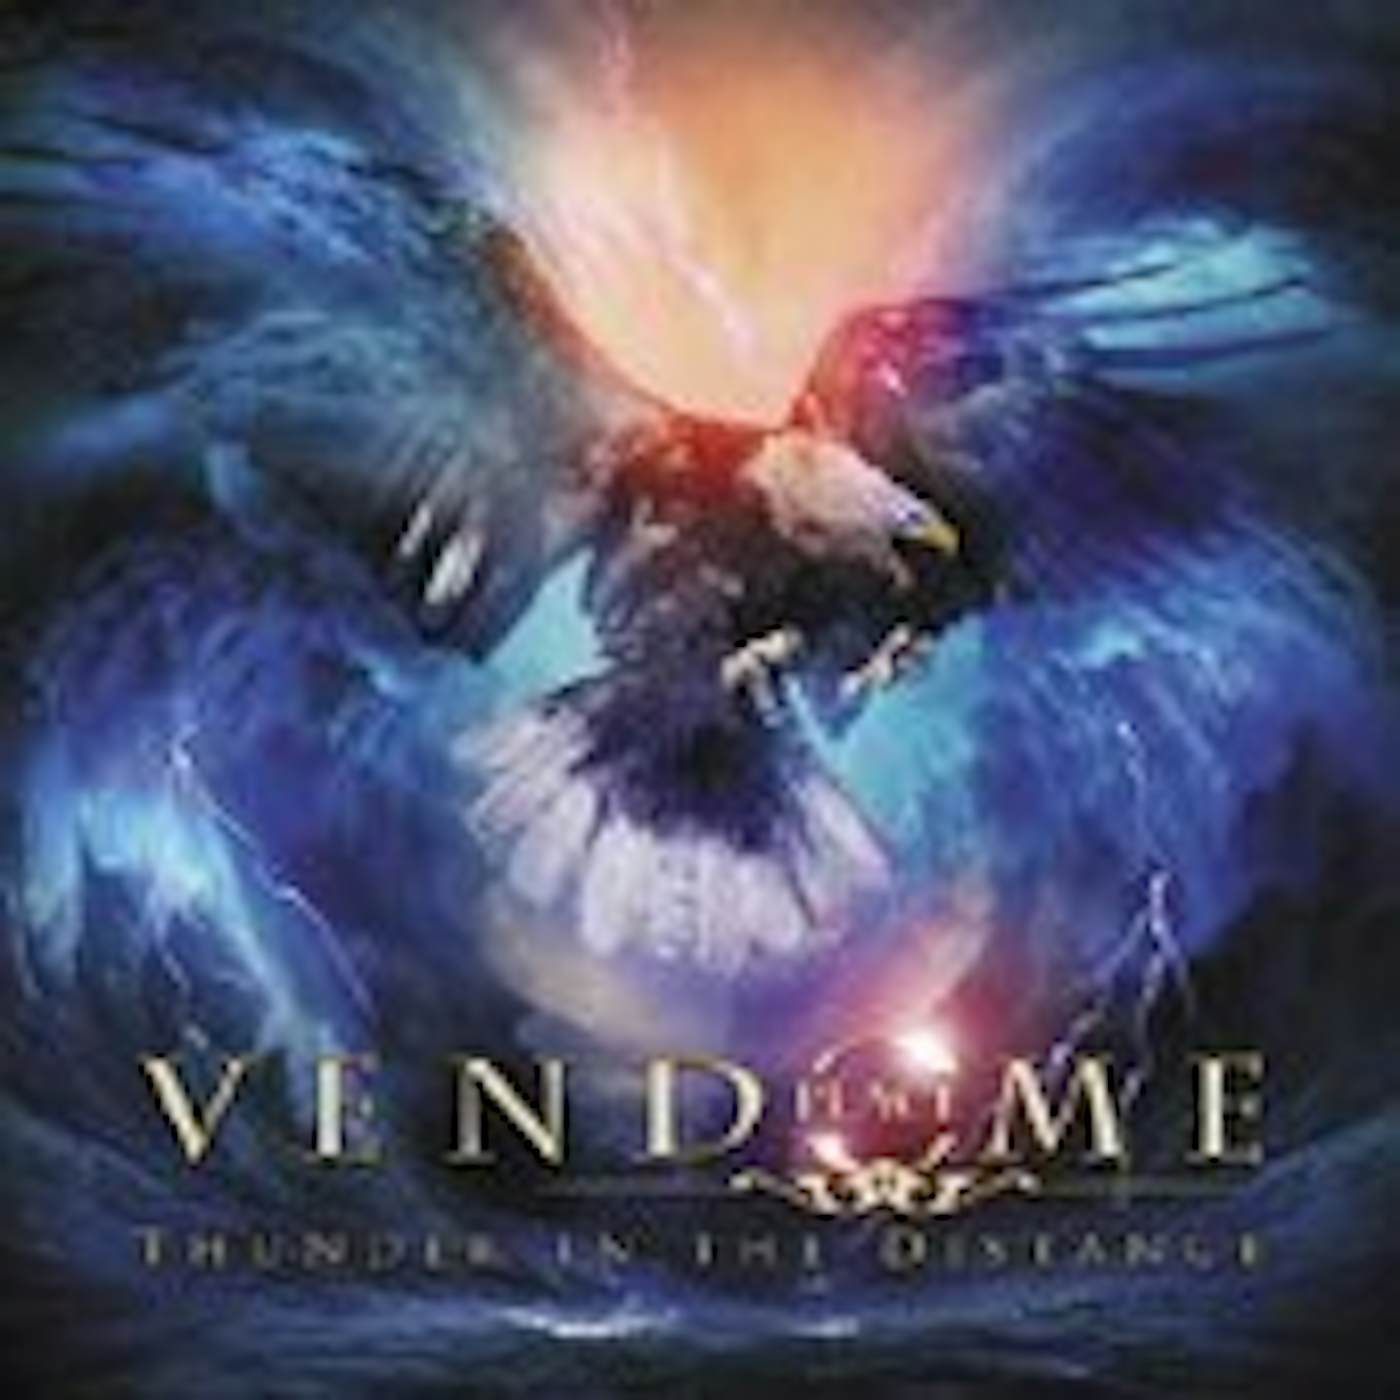 Place Vendome THUNDER IN THE DISTANCE CD